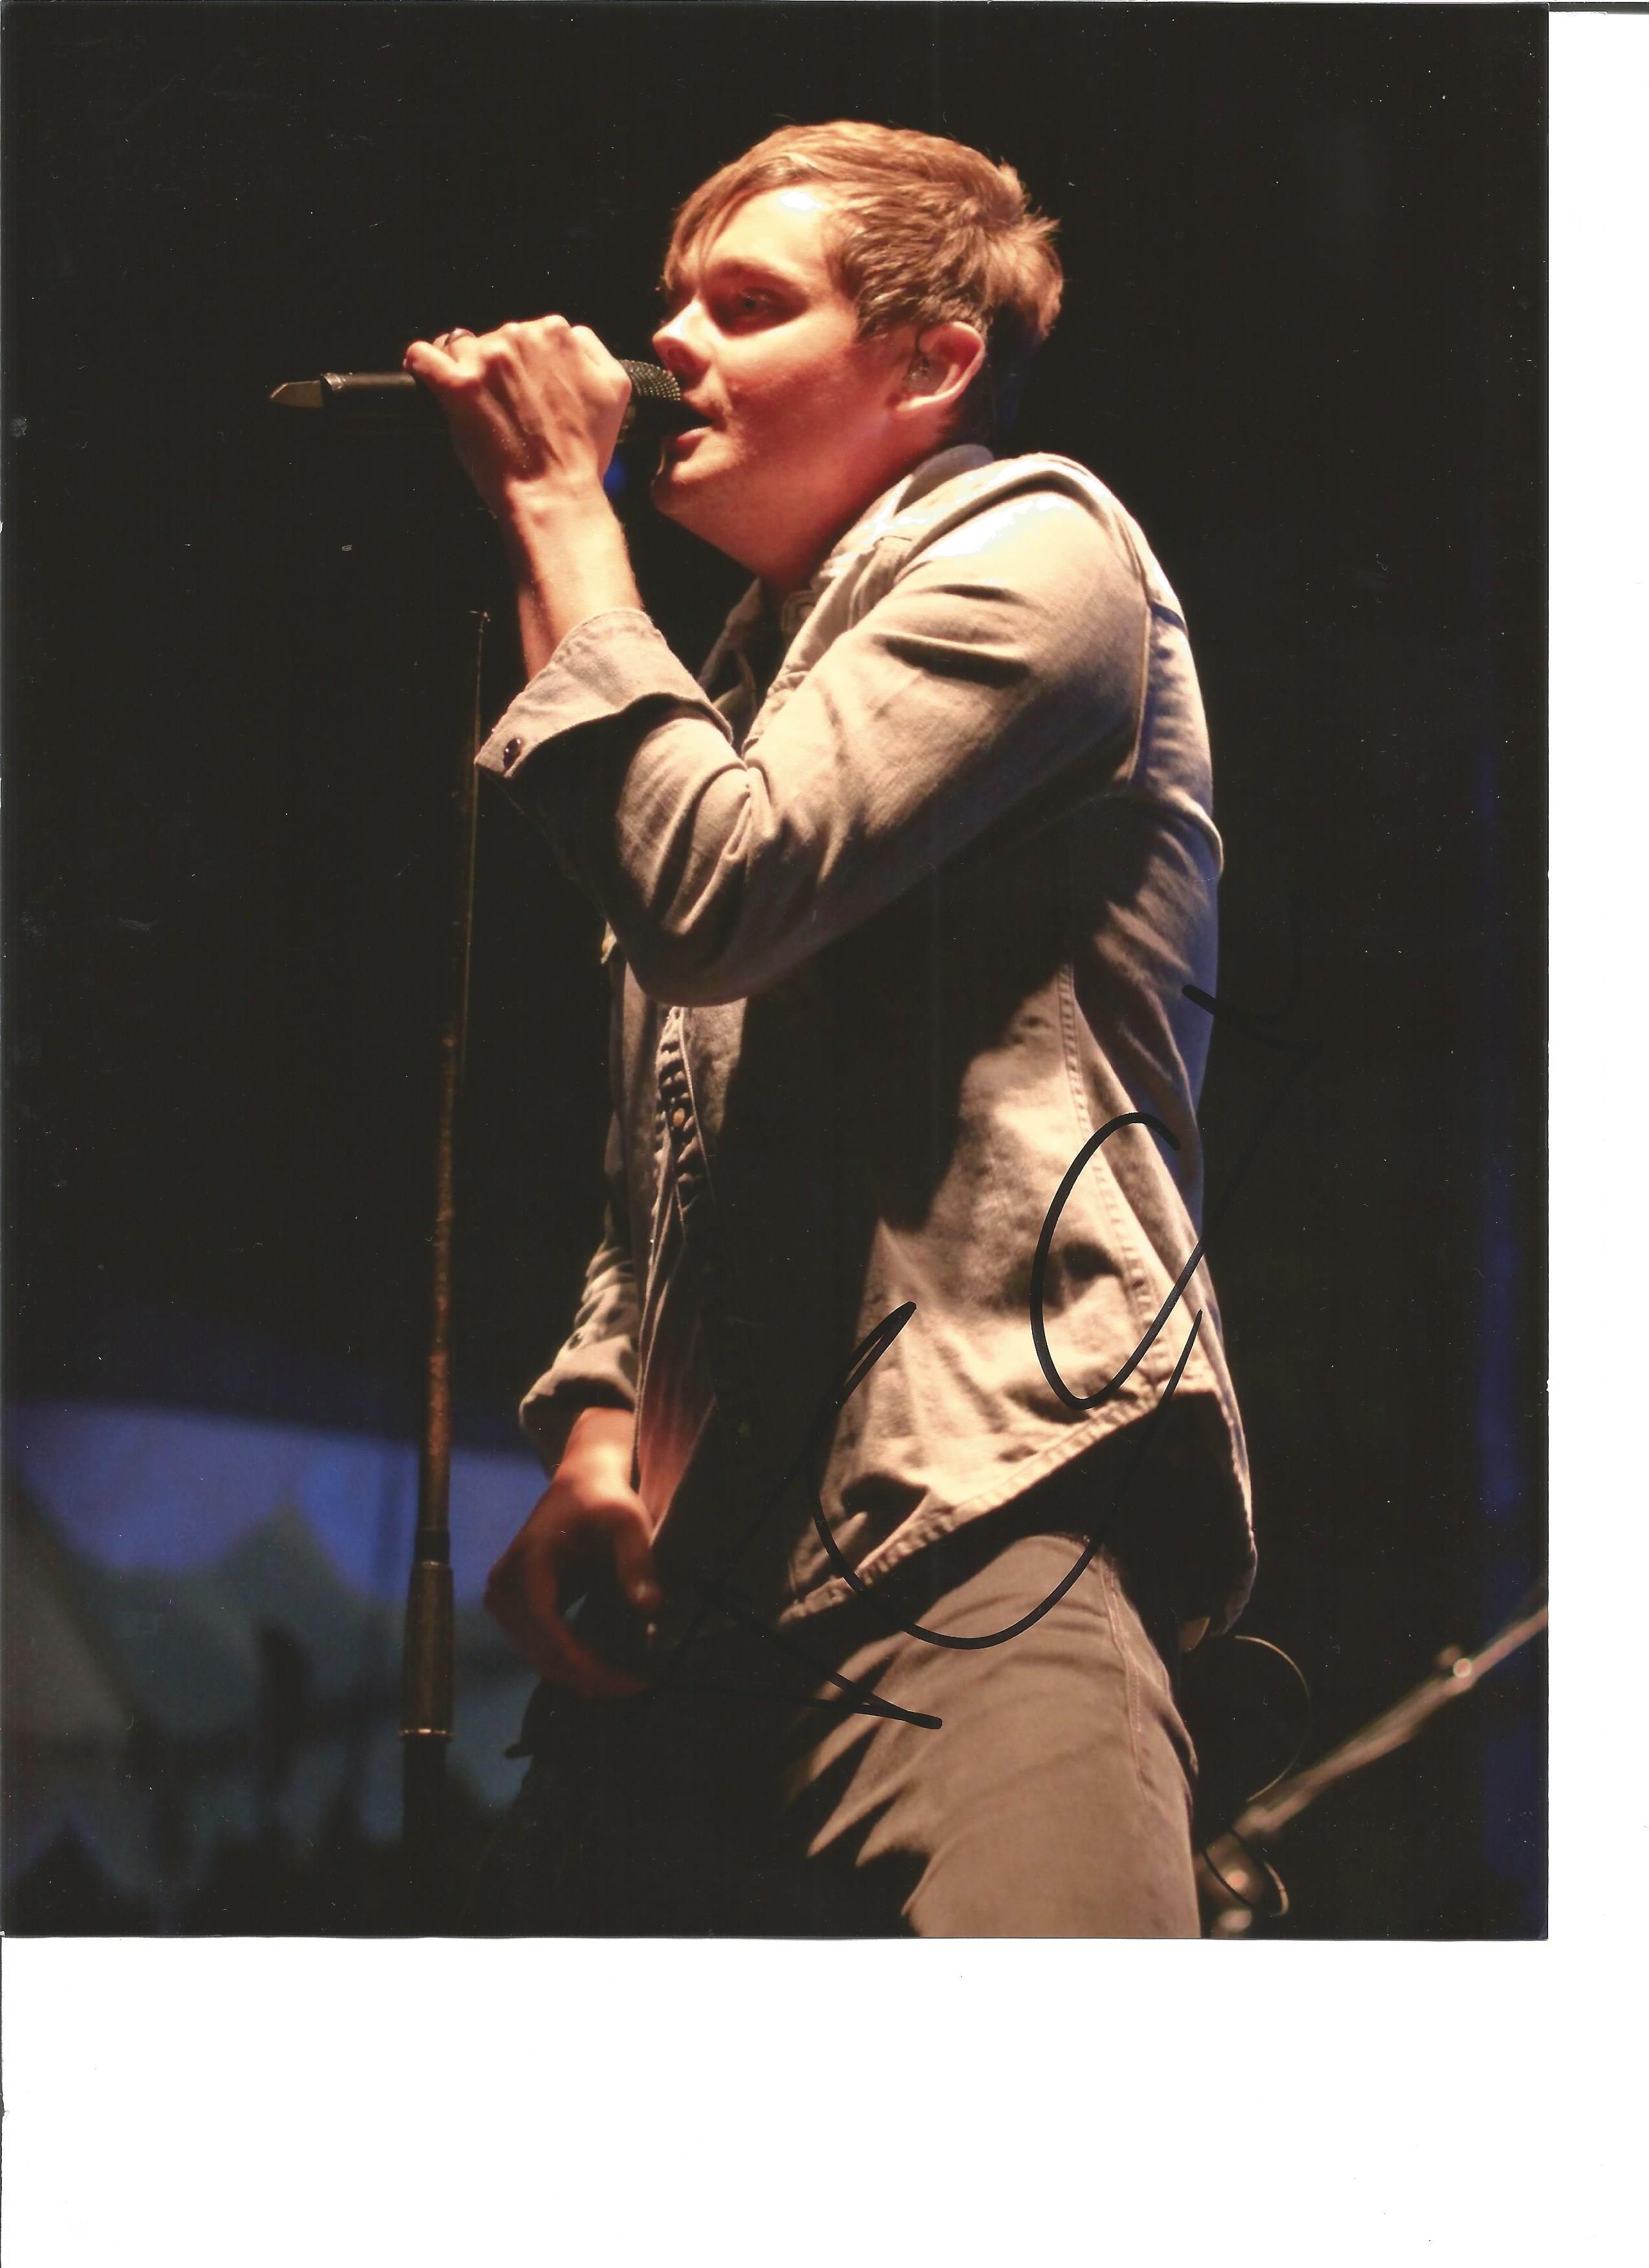 Tom Chaplin Keane Singer Signed 8x10 music Photo. Good Condition. All autographs are genuine hand